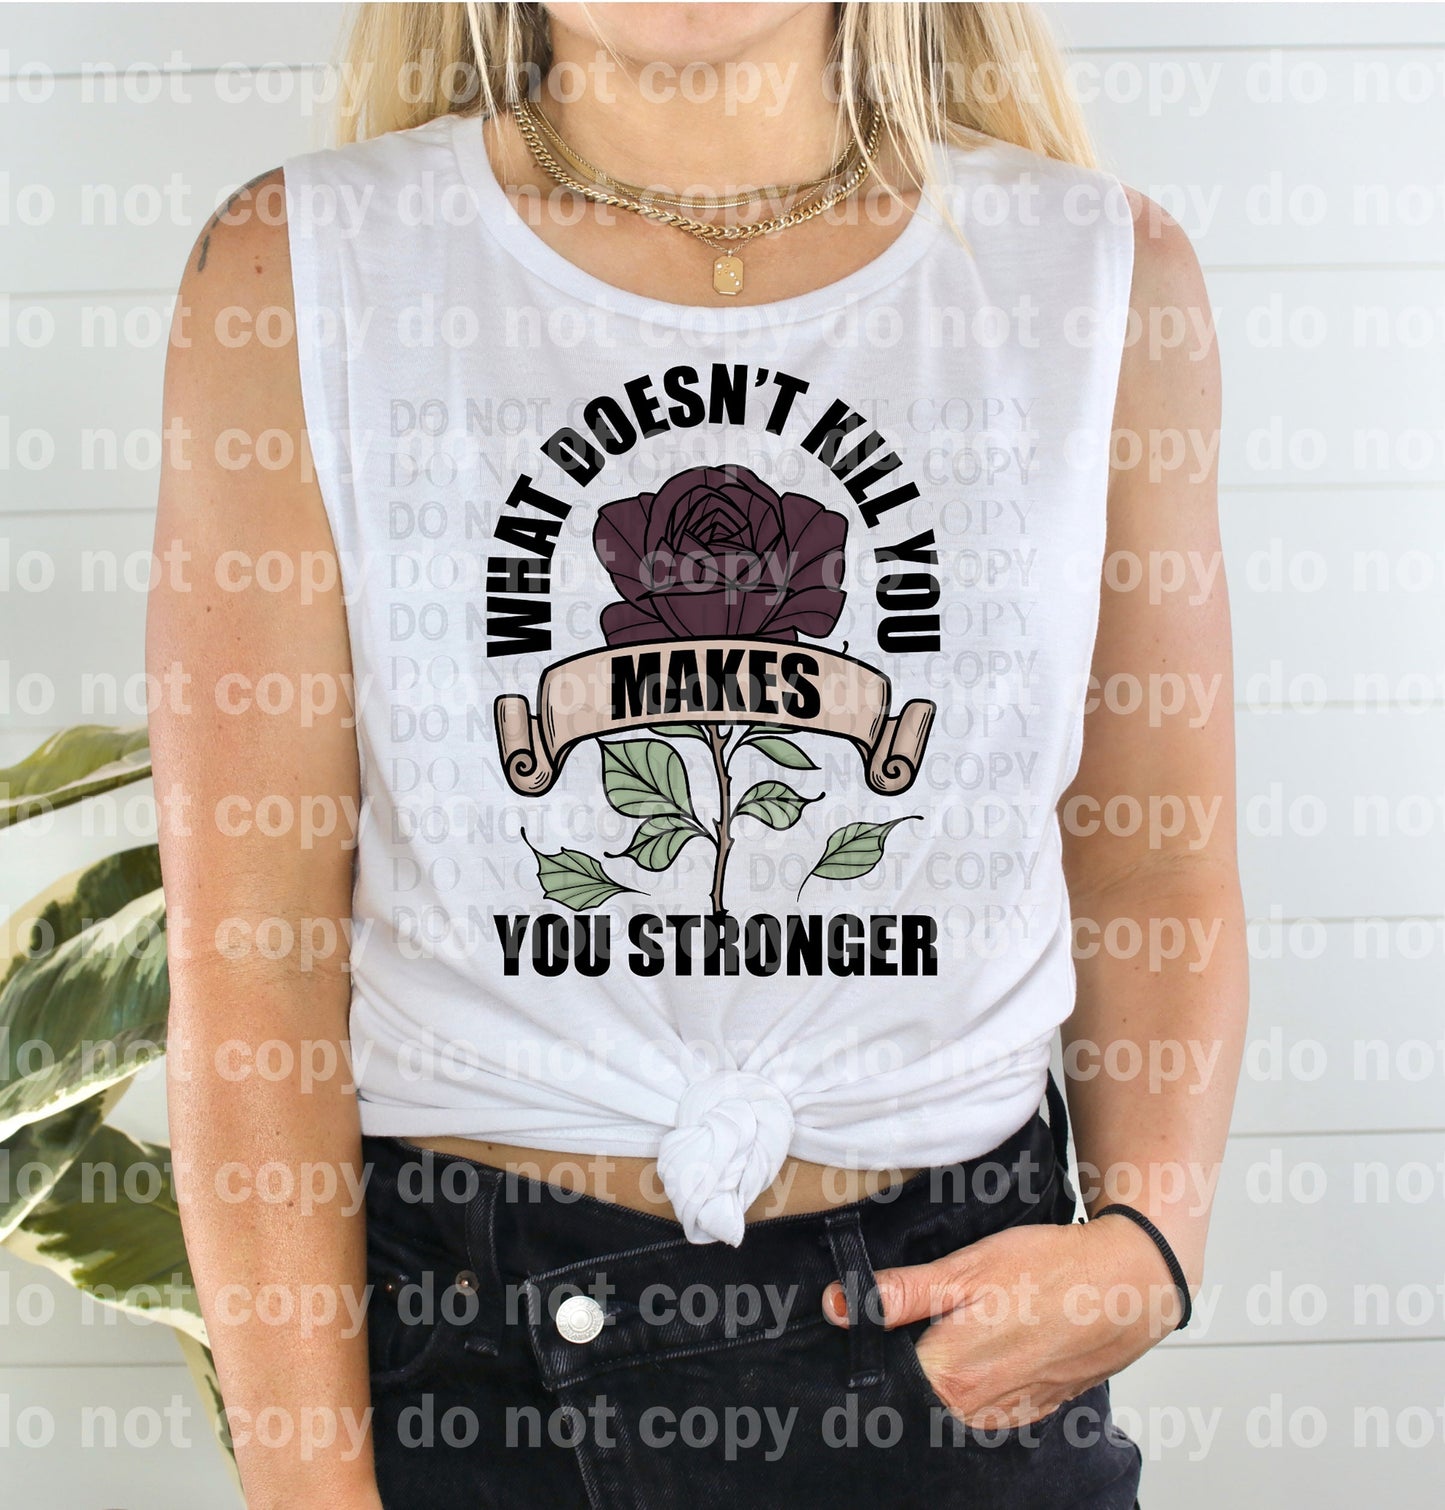 What Doesn't Kill You Makes You Stronger Full Color/Black/White Dream Print or Sublimation Print